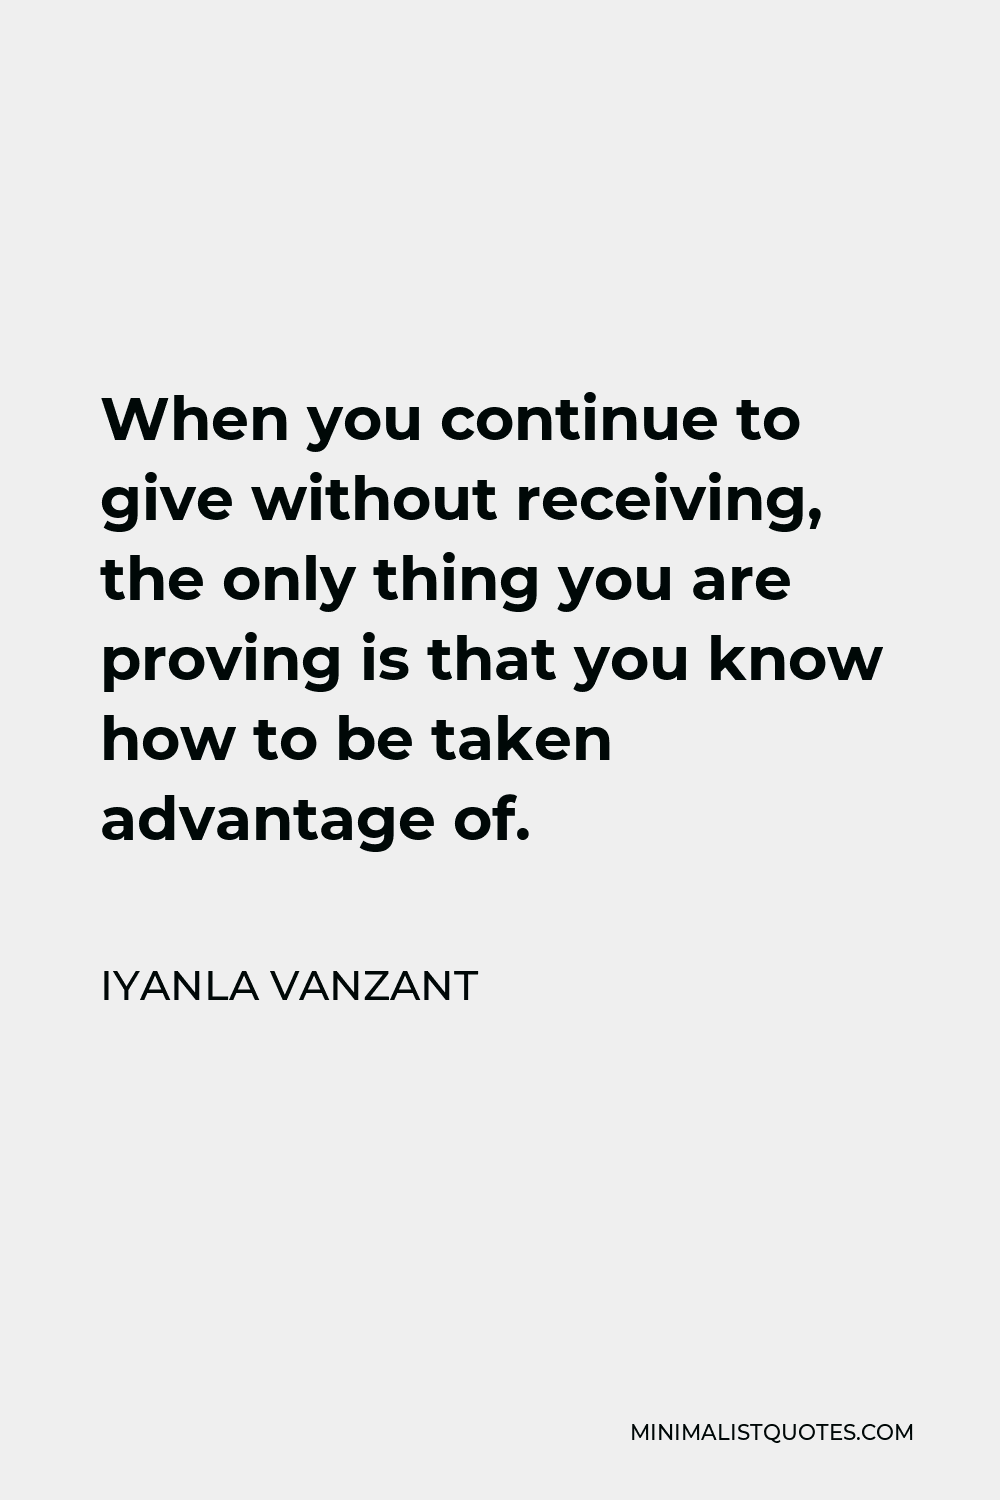 Iyanla Vanzant Quote - When you continue to give without receiving, the only thing you are proving is that you know how to be taken advantage of.